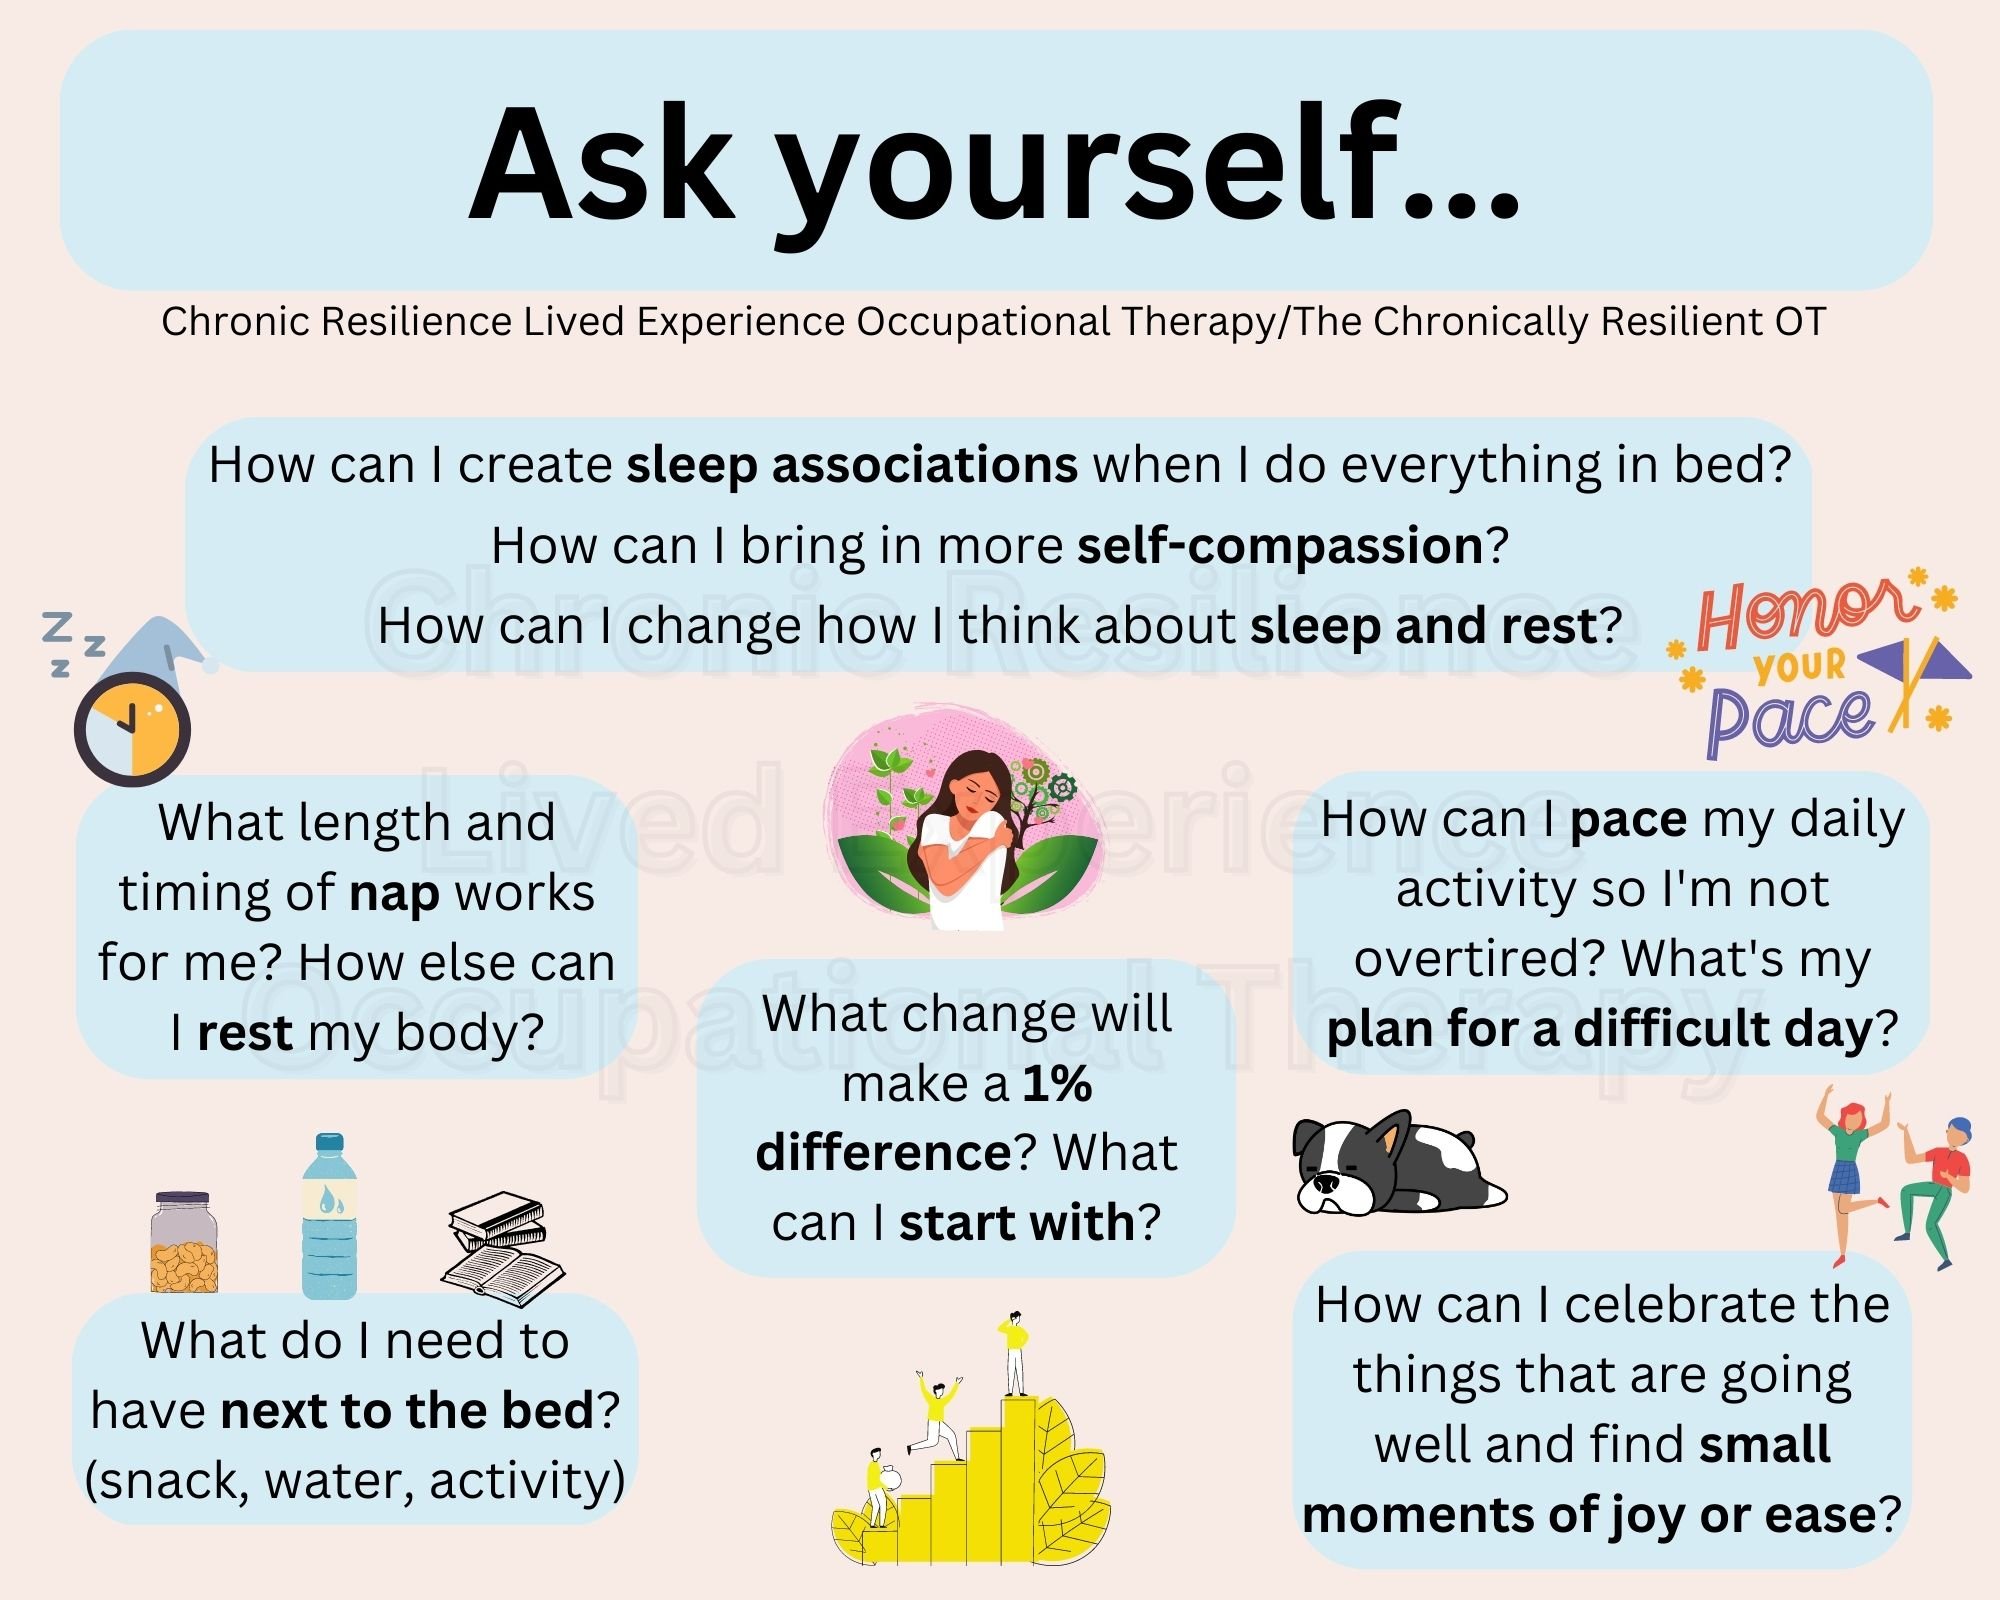   Image description: a graphic on a tan background with blue text boxes. Heading: ‘Ask yourself...’  How can I create  sleep associations  when I do everything in bed? How can I bring in more  self-compassion ? How can I change how I think about  sle